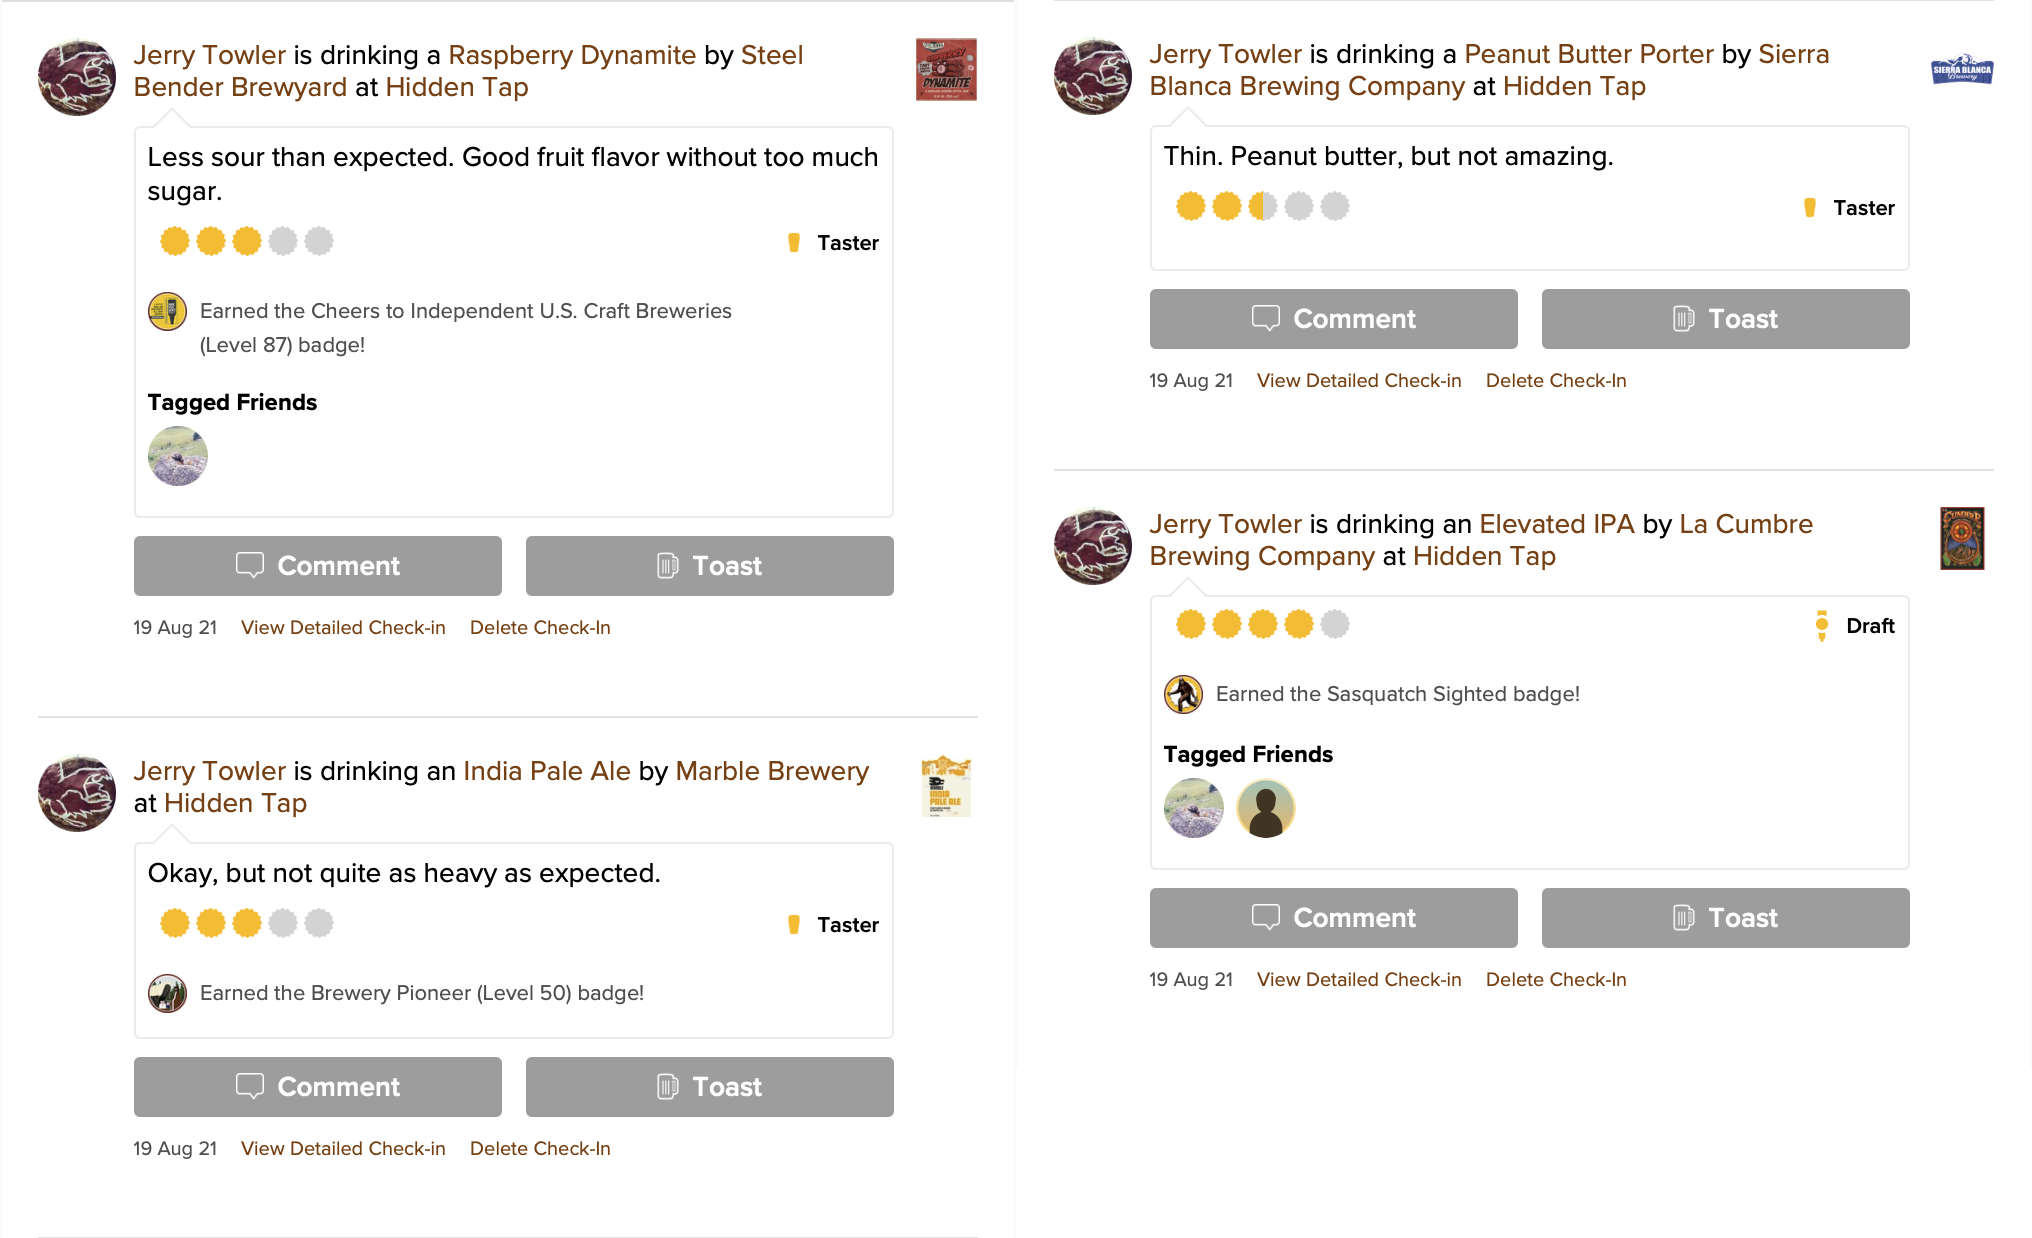 Untappd checkins for beers available at the Hidden Tap.